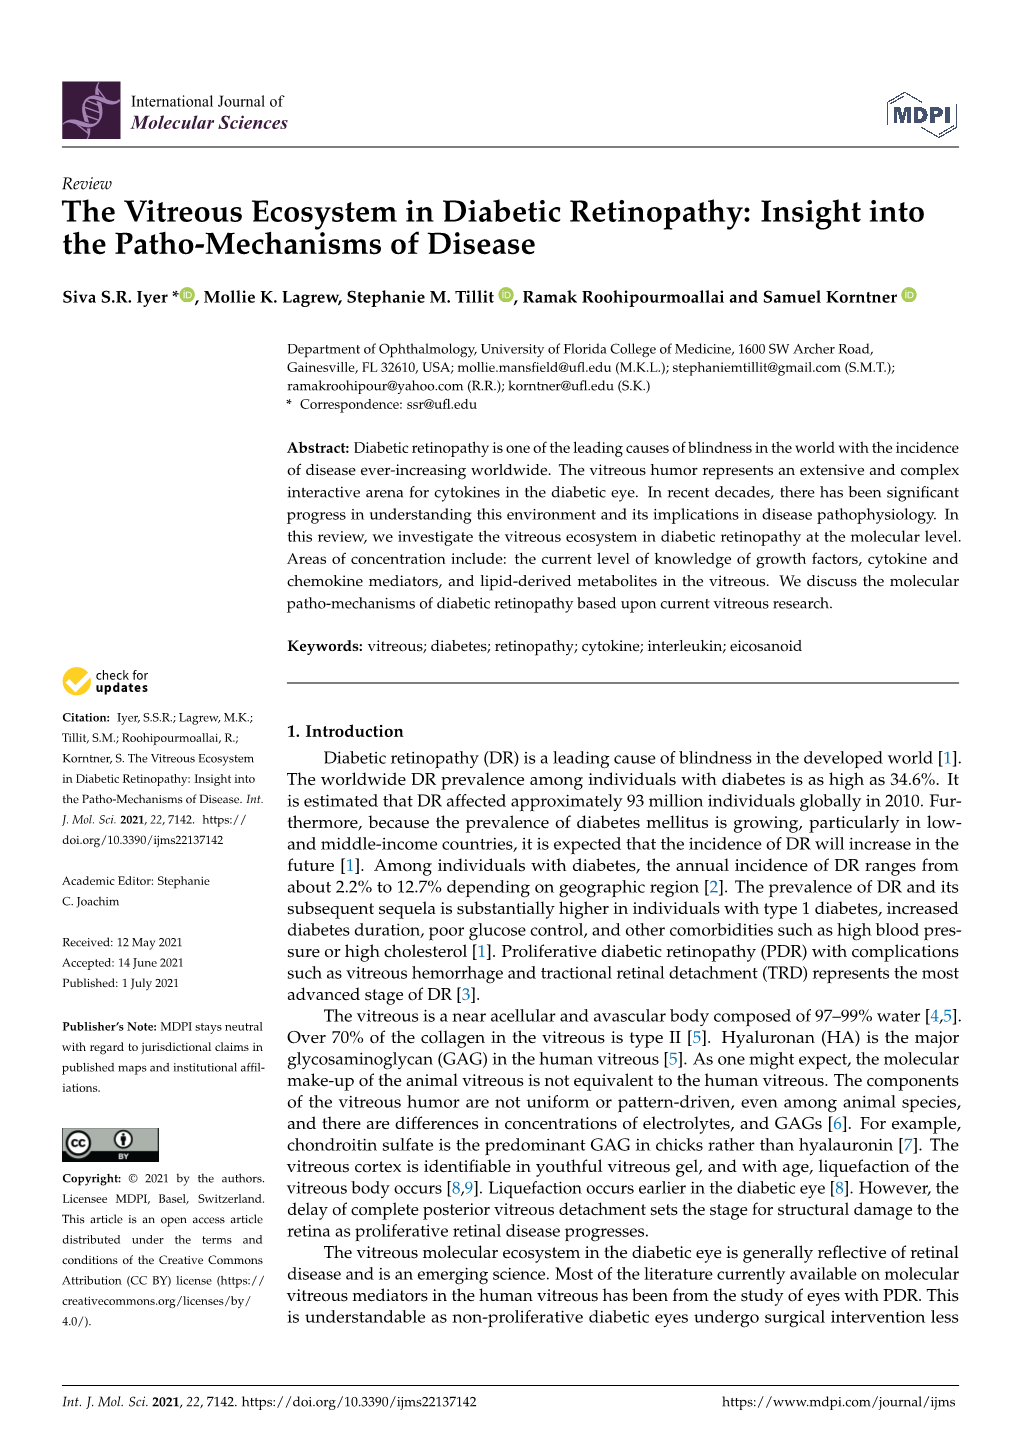 The Vitreous Ecosystem in Diabetic Retinopathy: Insight Into the Patho-Mechanisms of Disease